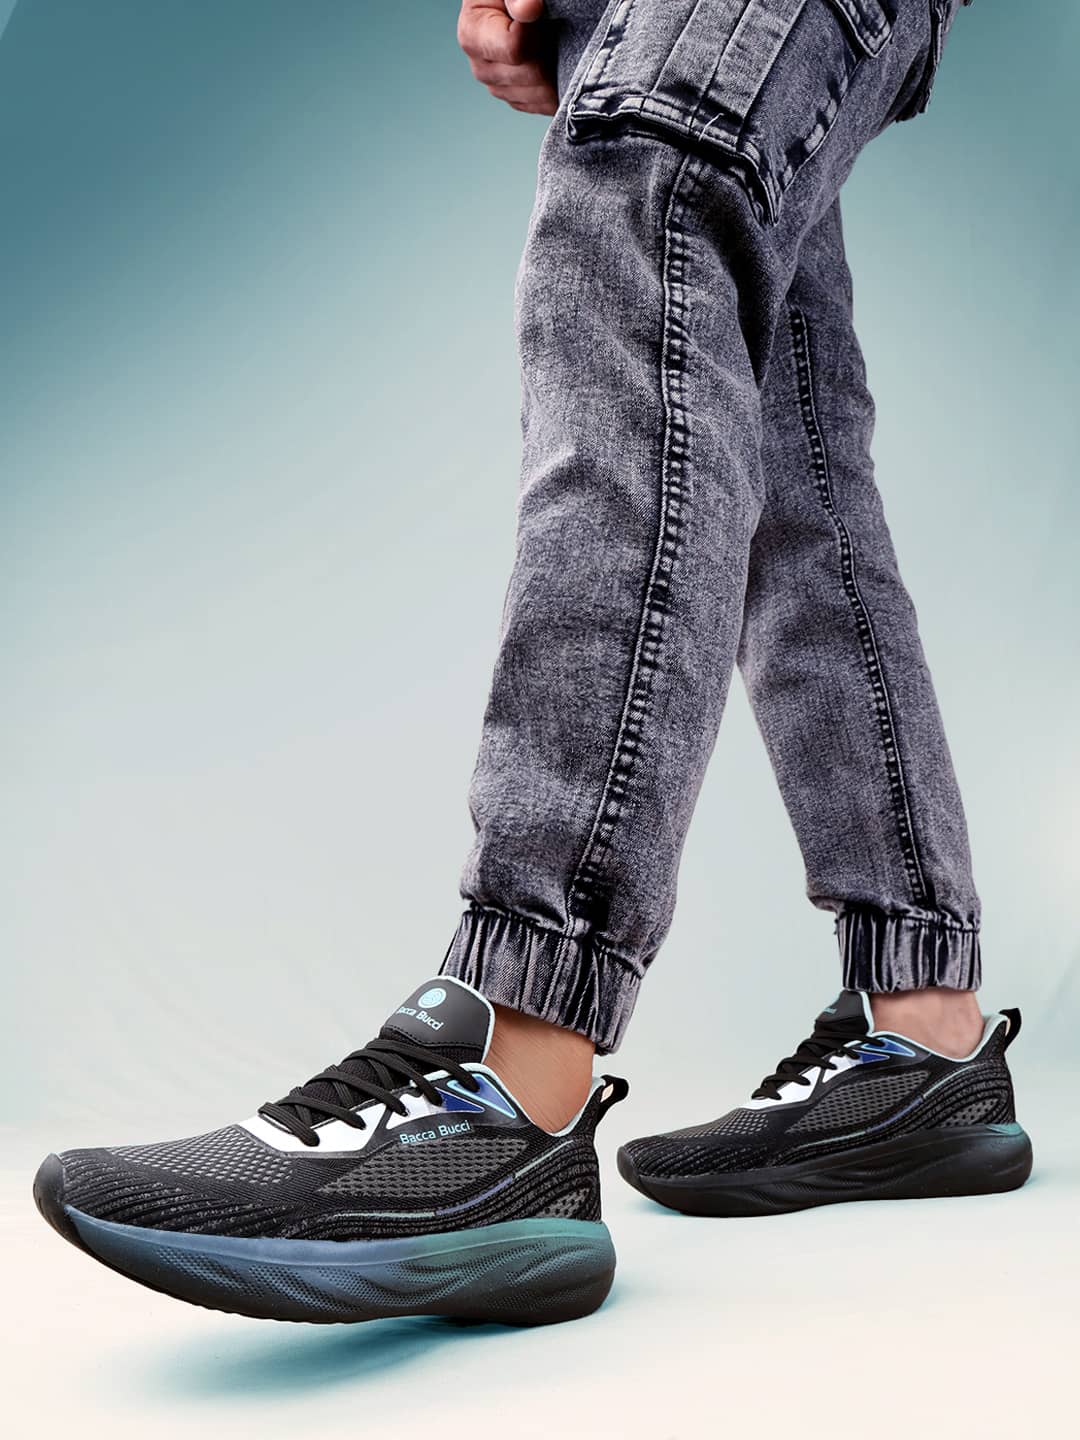 Bacca Bucci HORIZON: Advanced Performance Athletic and Casual Shoes